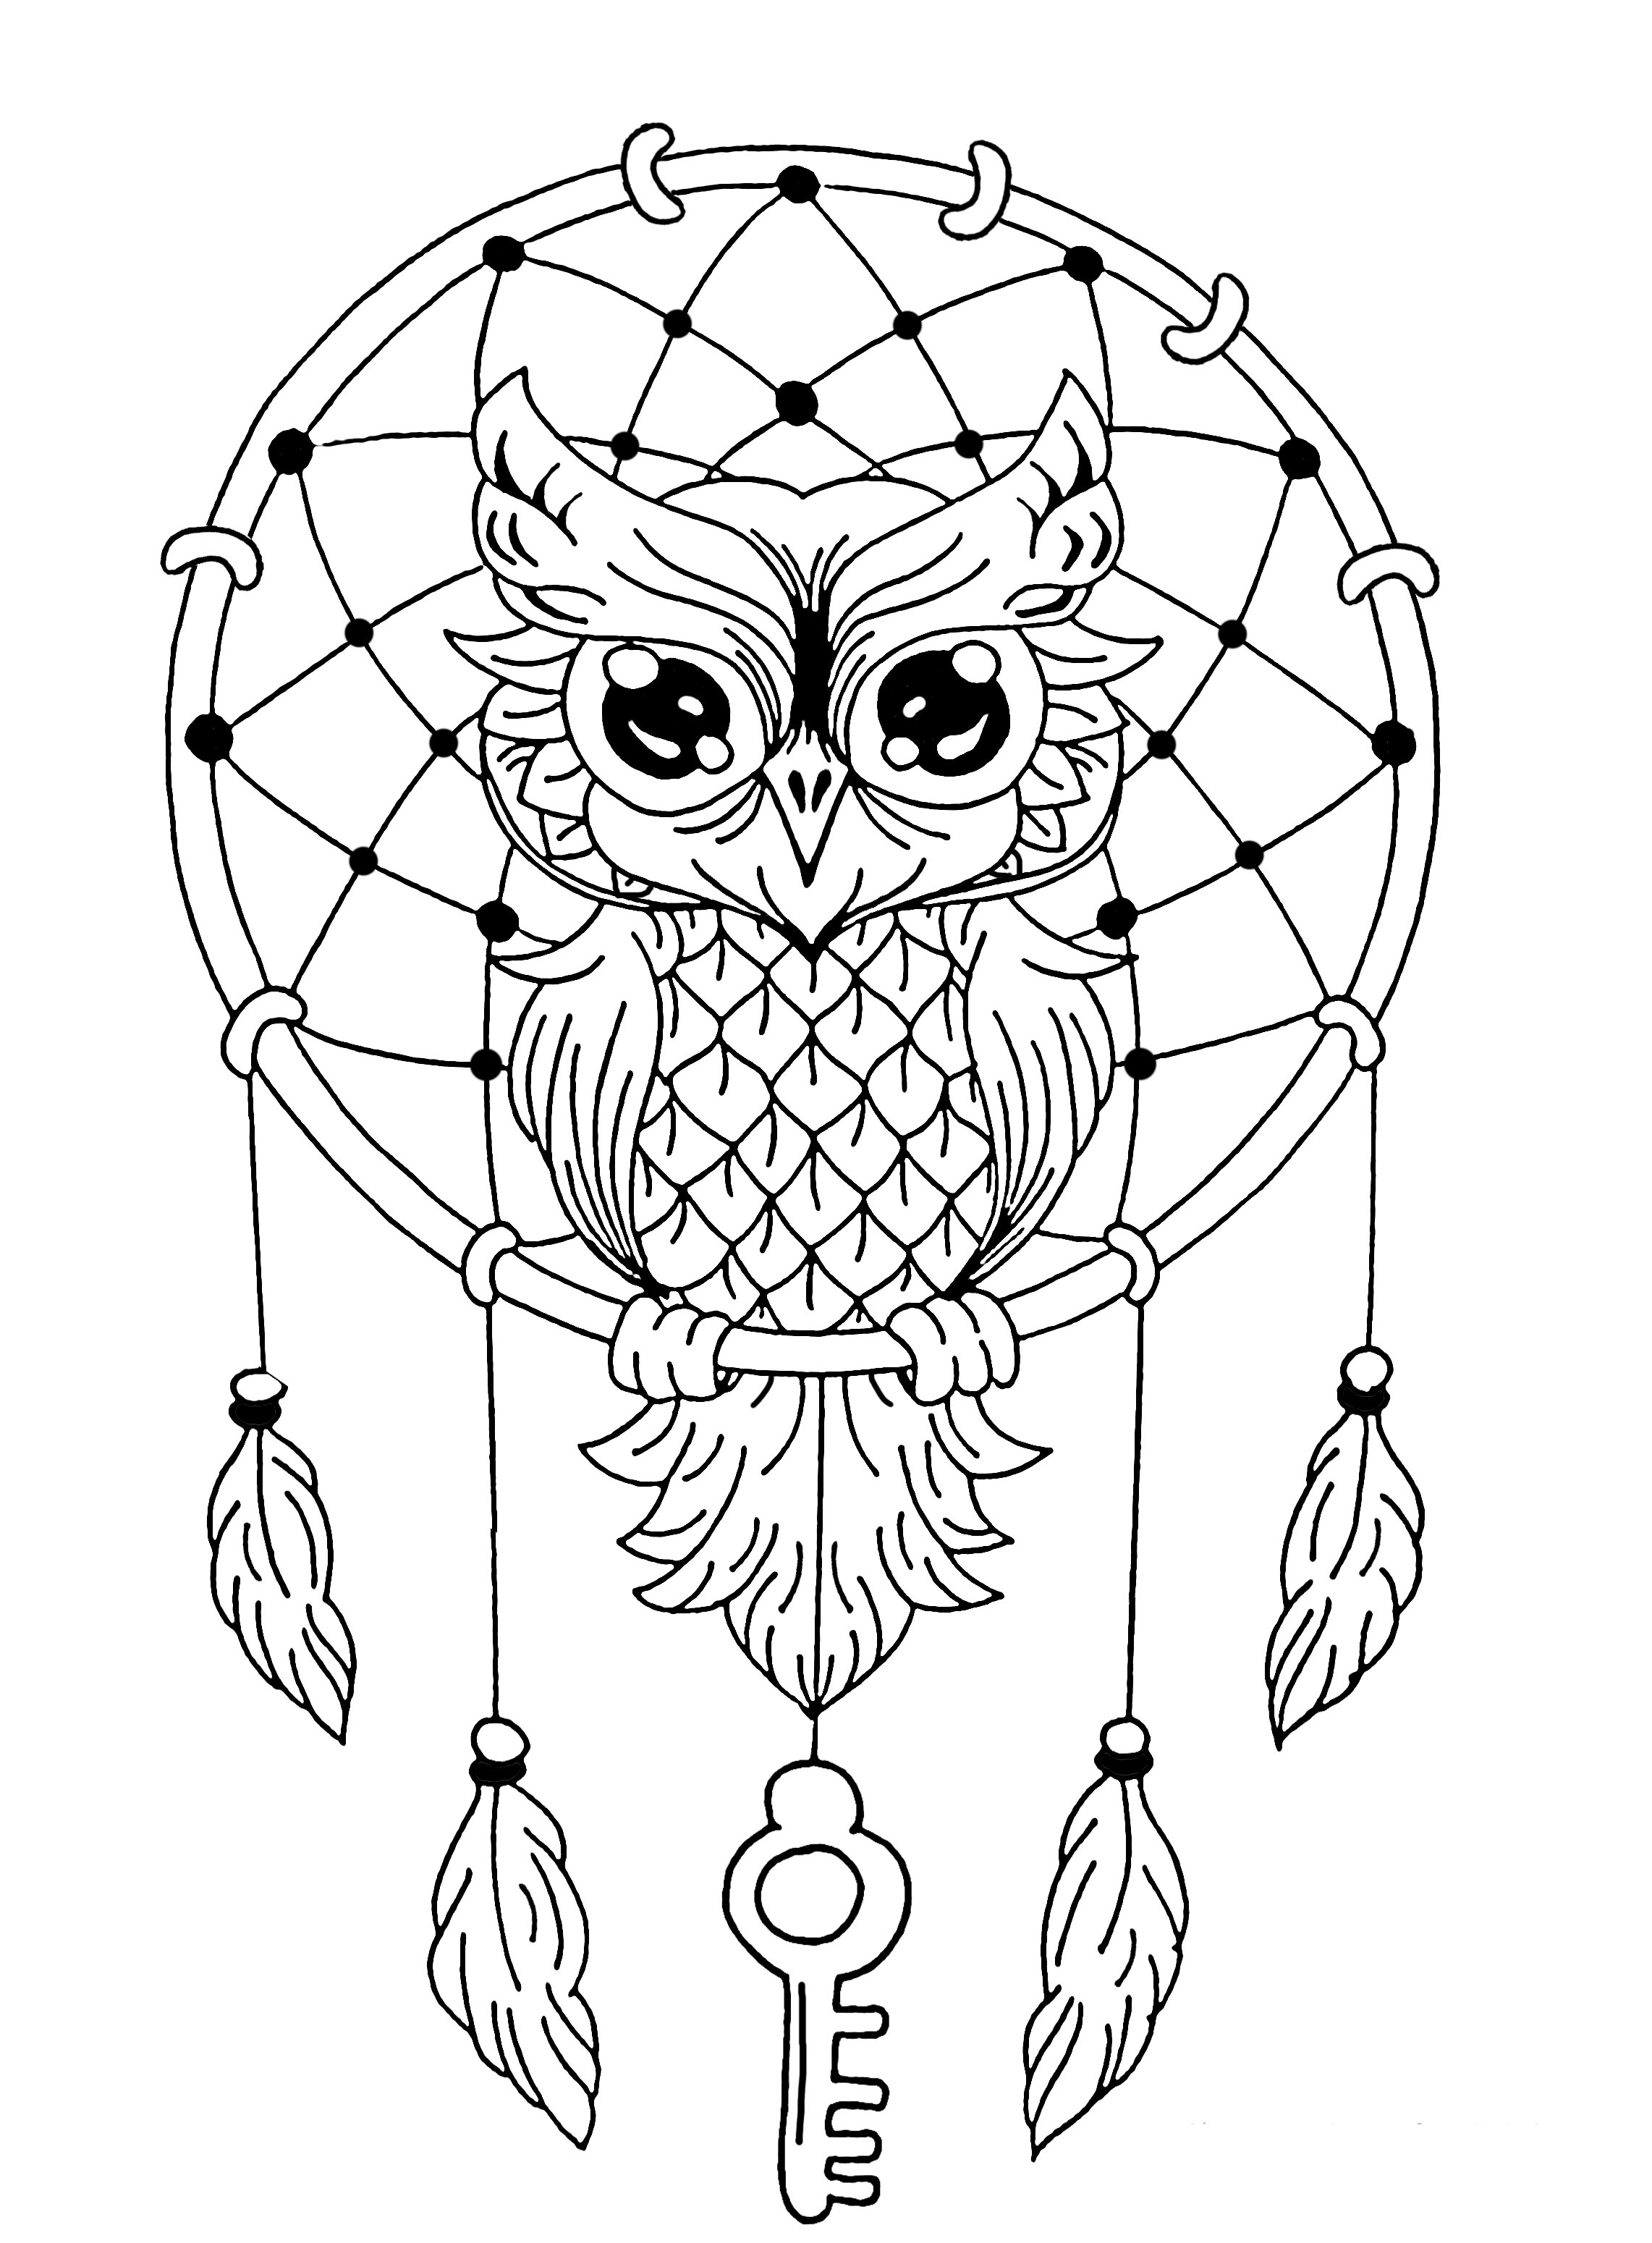 This owl in a dreamcatcher is just waiting to be colored in this pretty original Mandala, it's up to you to print it and let your artistic sense guide you.